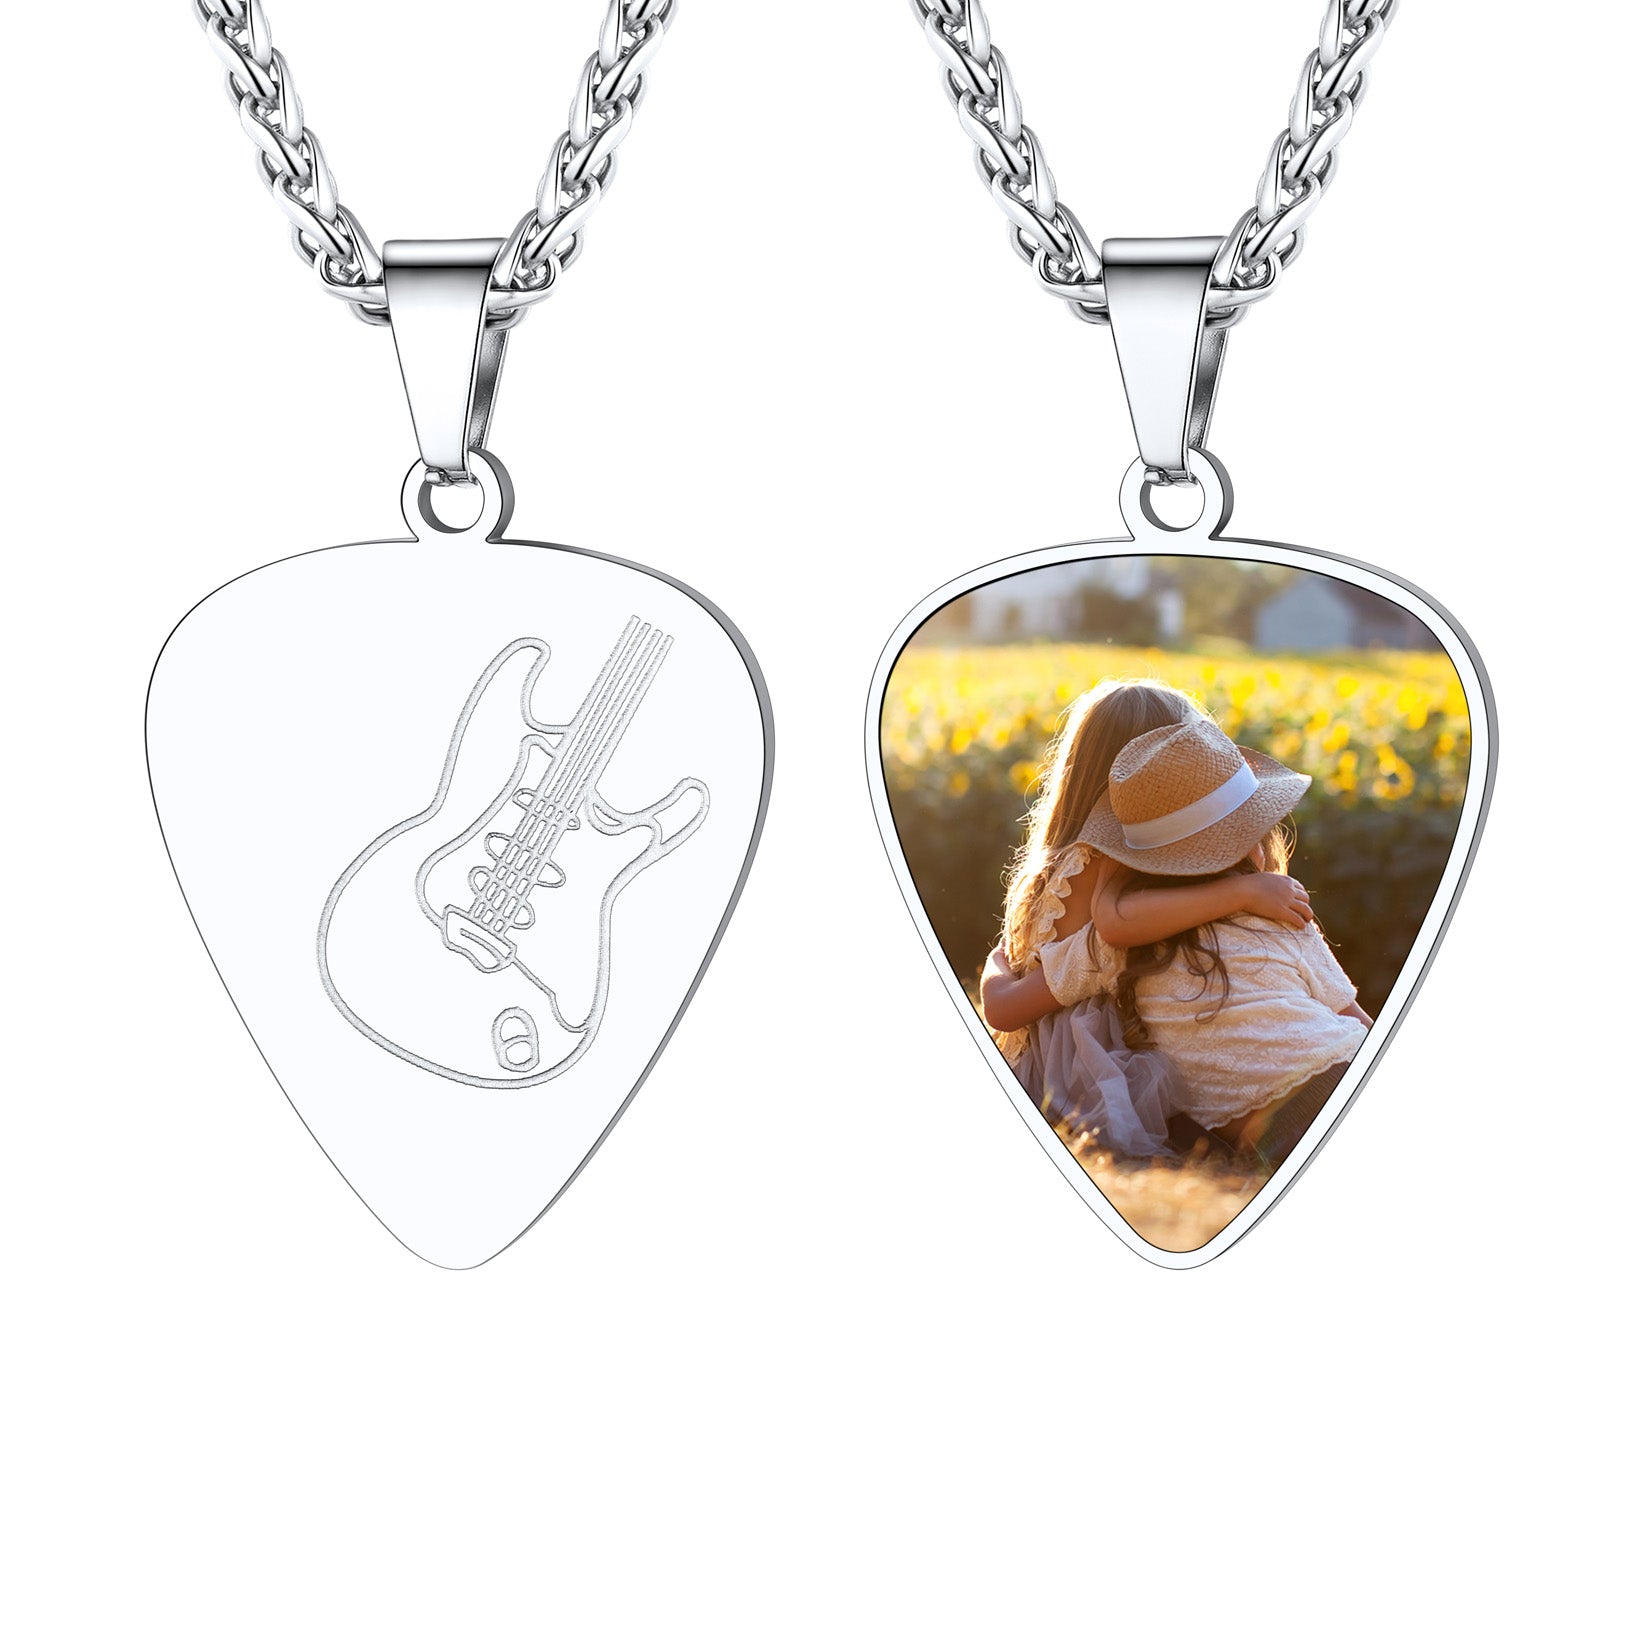 Personalized Guitar Picks Picture Necklace